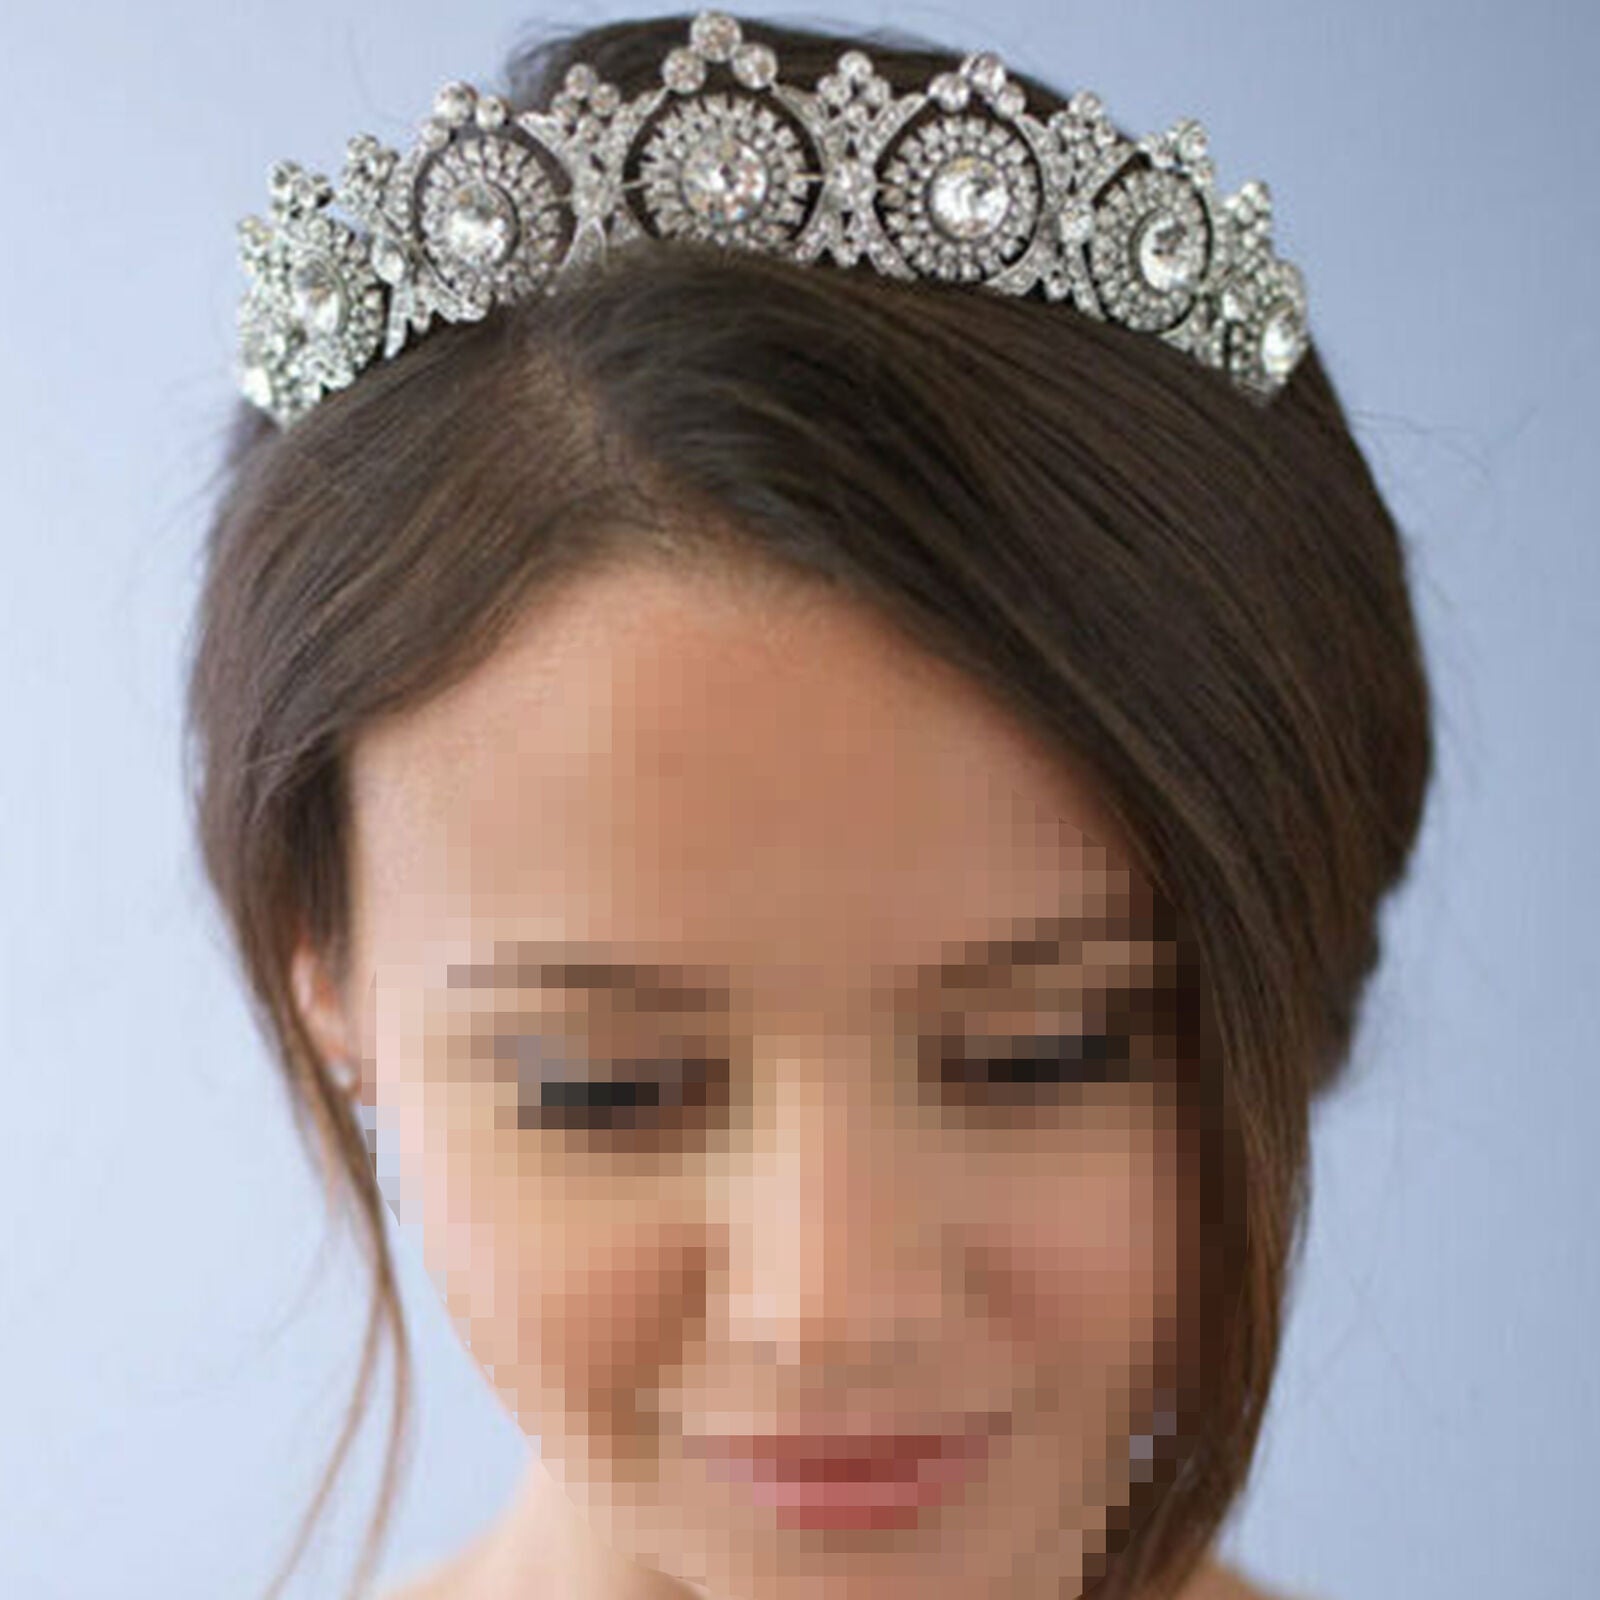 3.2cm High Crystal Tiara Crown Wedding Bridal Party Pageant Prom